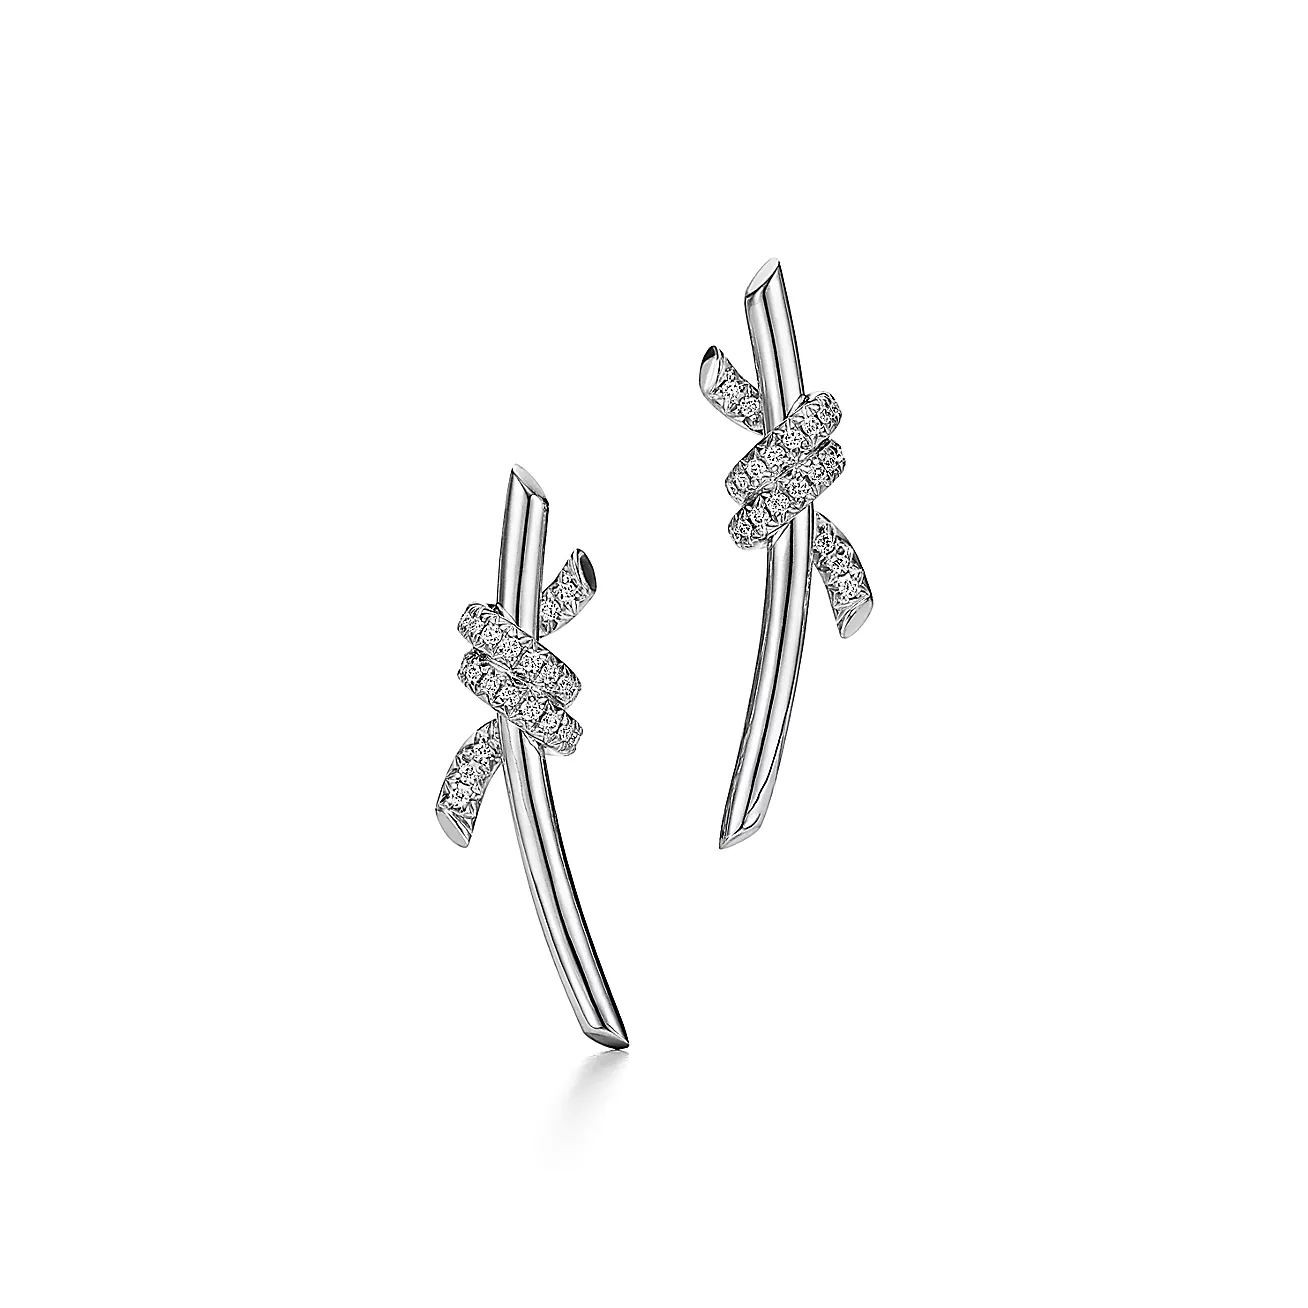 Tiffany Knot Earrings in 18k Gold with Diamonds - Click Image to Close